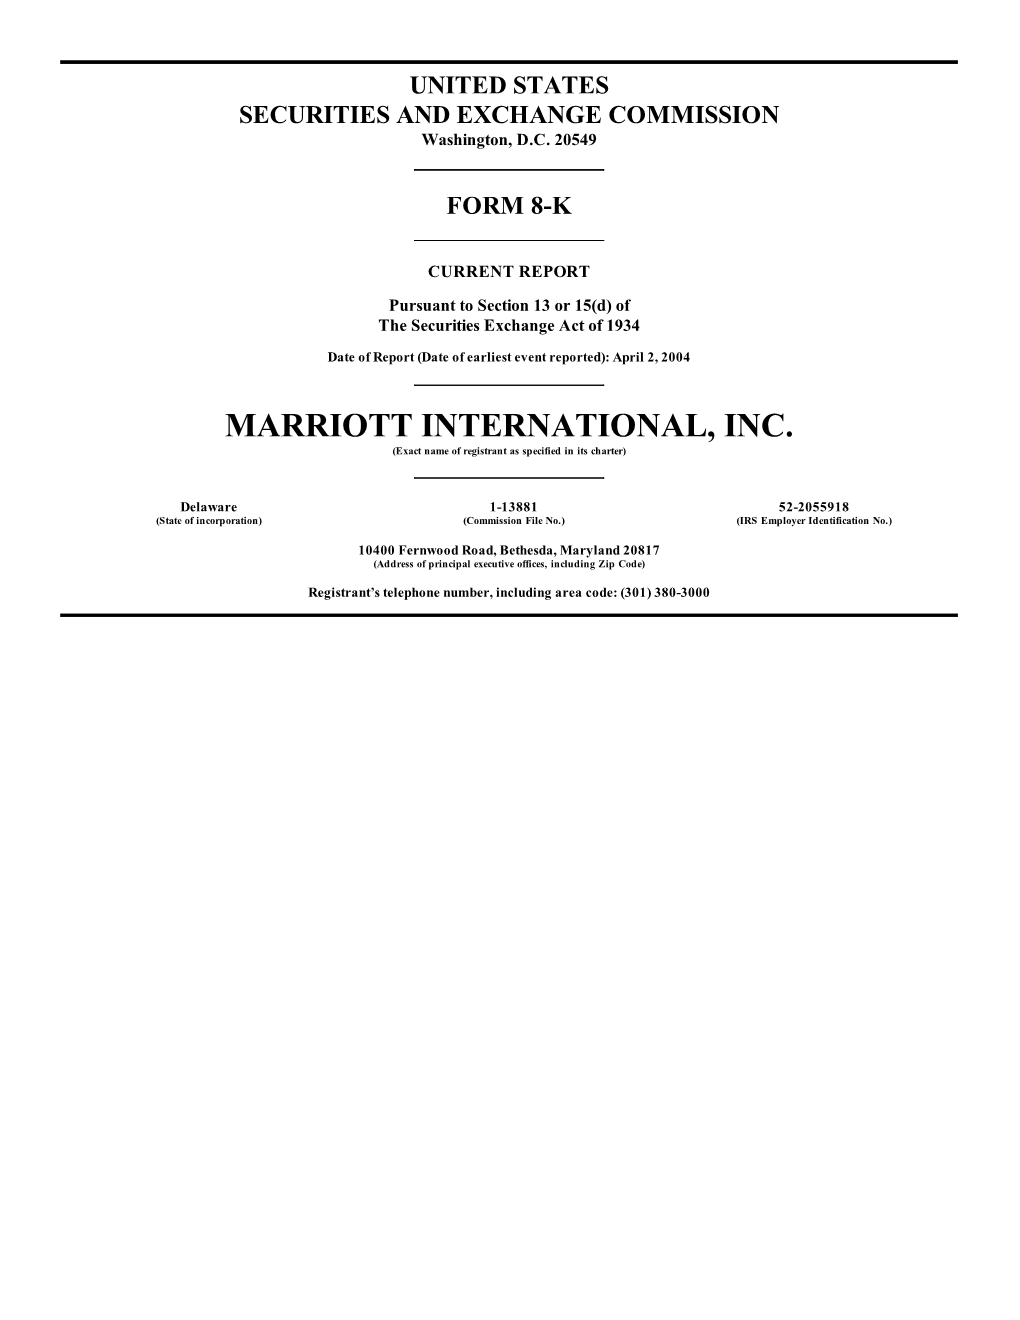 MARRIOTT INTERNATIONAL, INC. (Exact Name of Registrant As Specified in Its Charter)